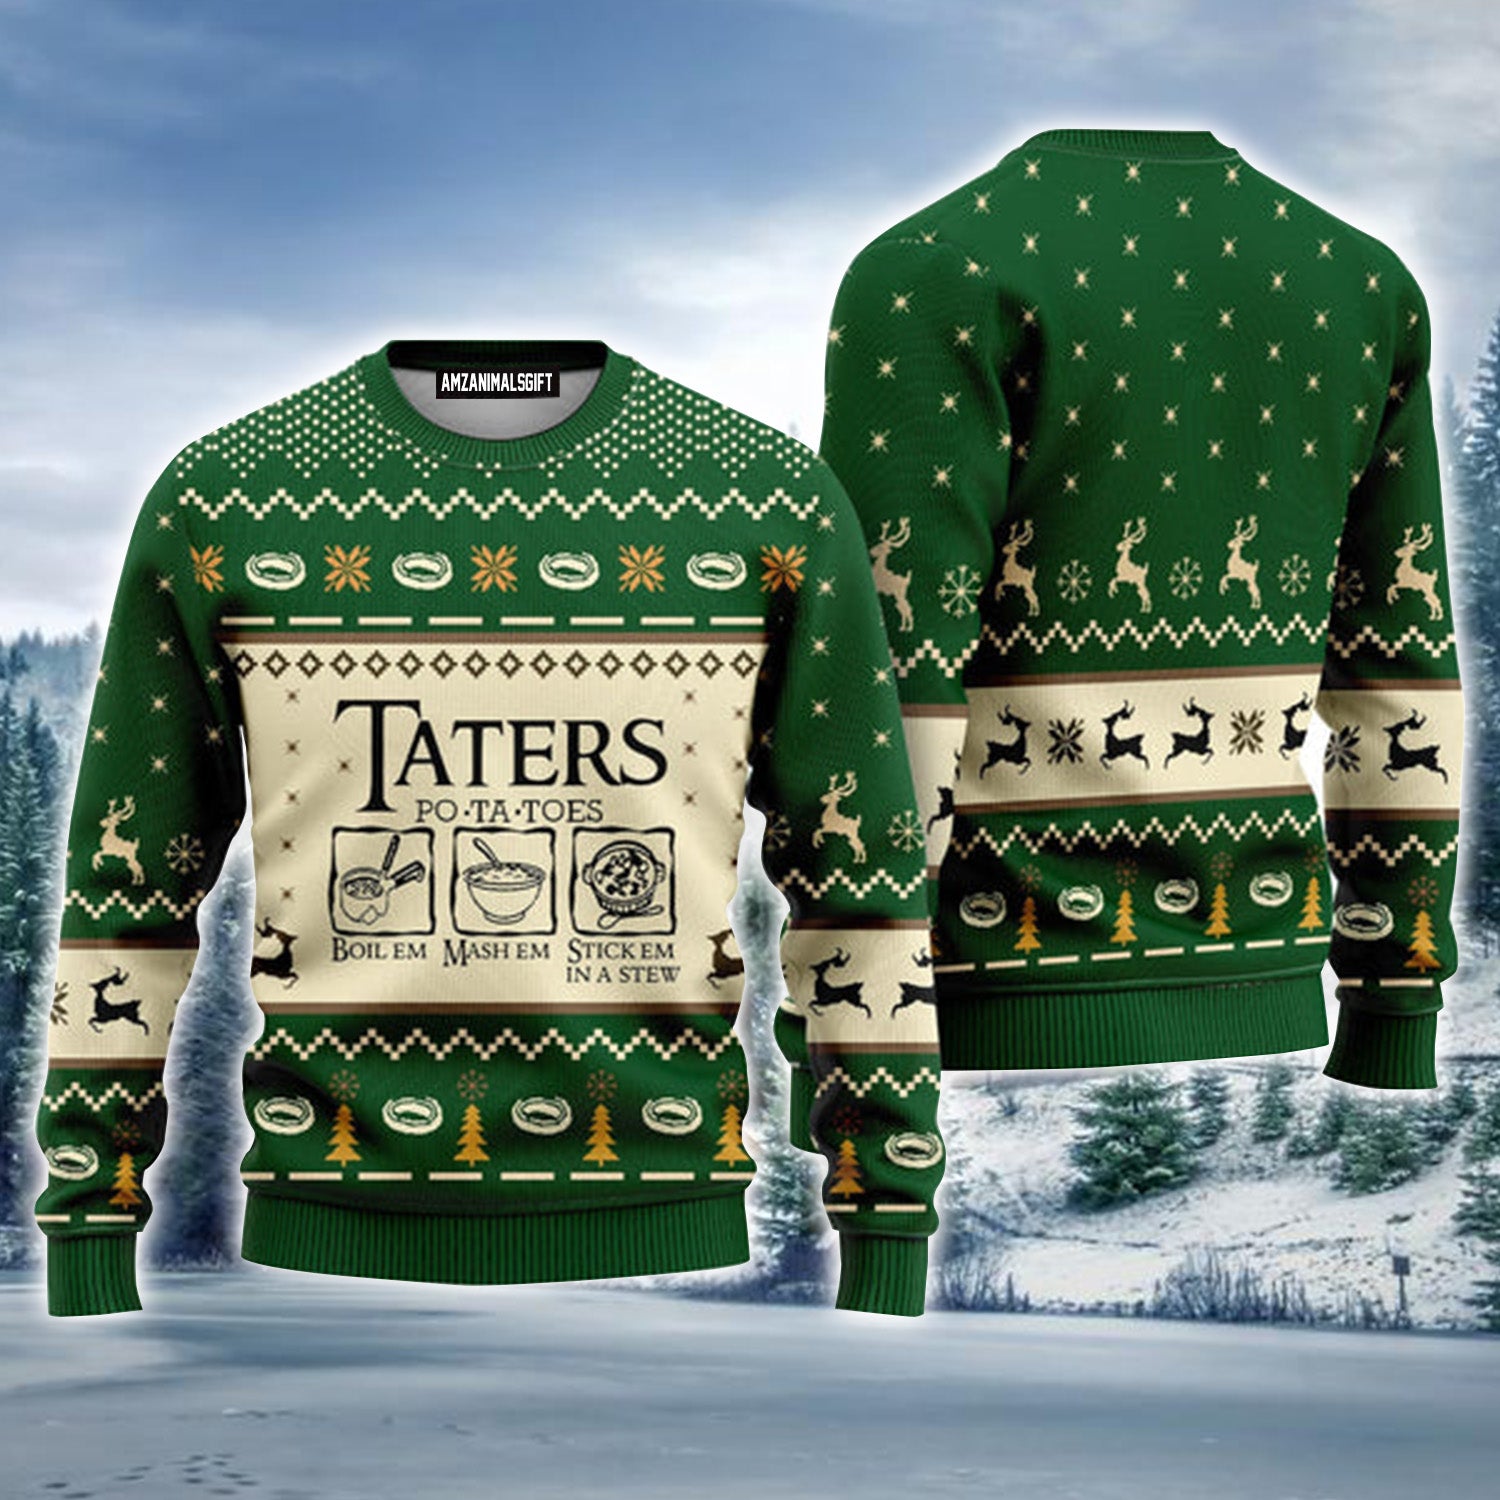 LOTR Potatoes Taters Green Urly Christmas Sweater, Christmas Sweater For Men & Women - Perfect Gift For Christmas, Family, Friends